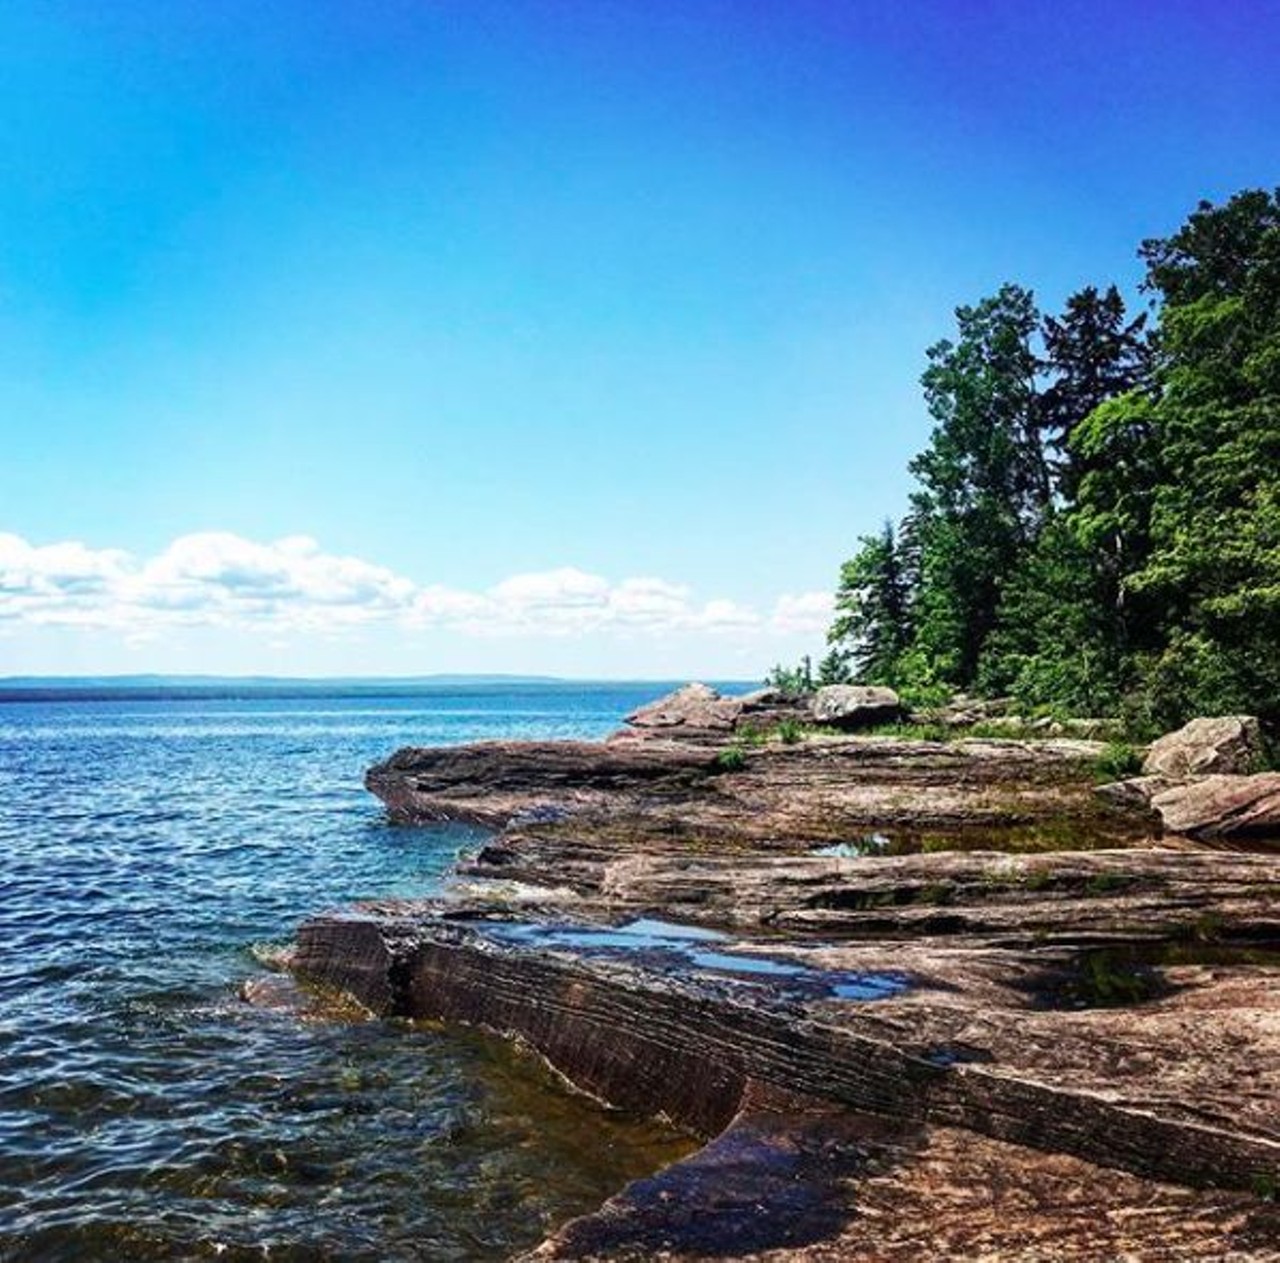 Point Abbaye&#146;
Aura
Walk to this remote spot on a few miles of trails and reach the lookout point of Point Abbeye&#146;. After taking in the beauty of our great state, you can take the trail back, or for the more adventurous, the shoreline. Walk along the rock cliffs and great pines for a daring hike and probably a few beautiful pictures. 
Photo via IG user @paprikaangel